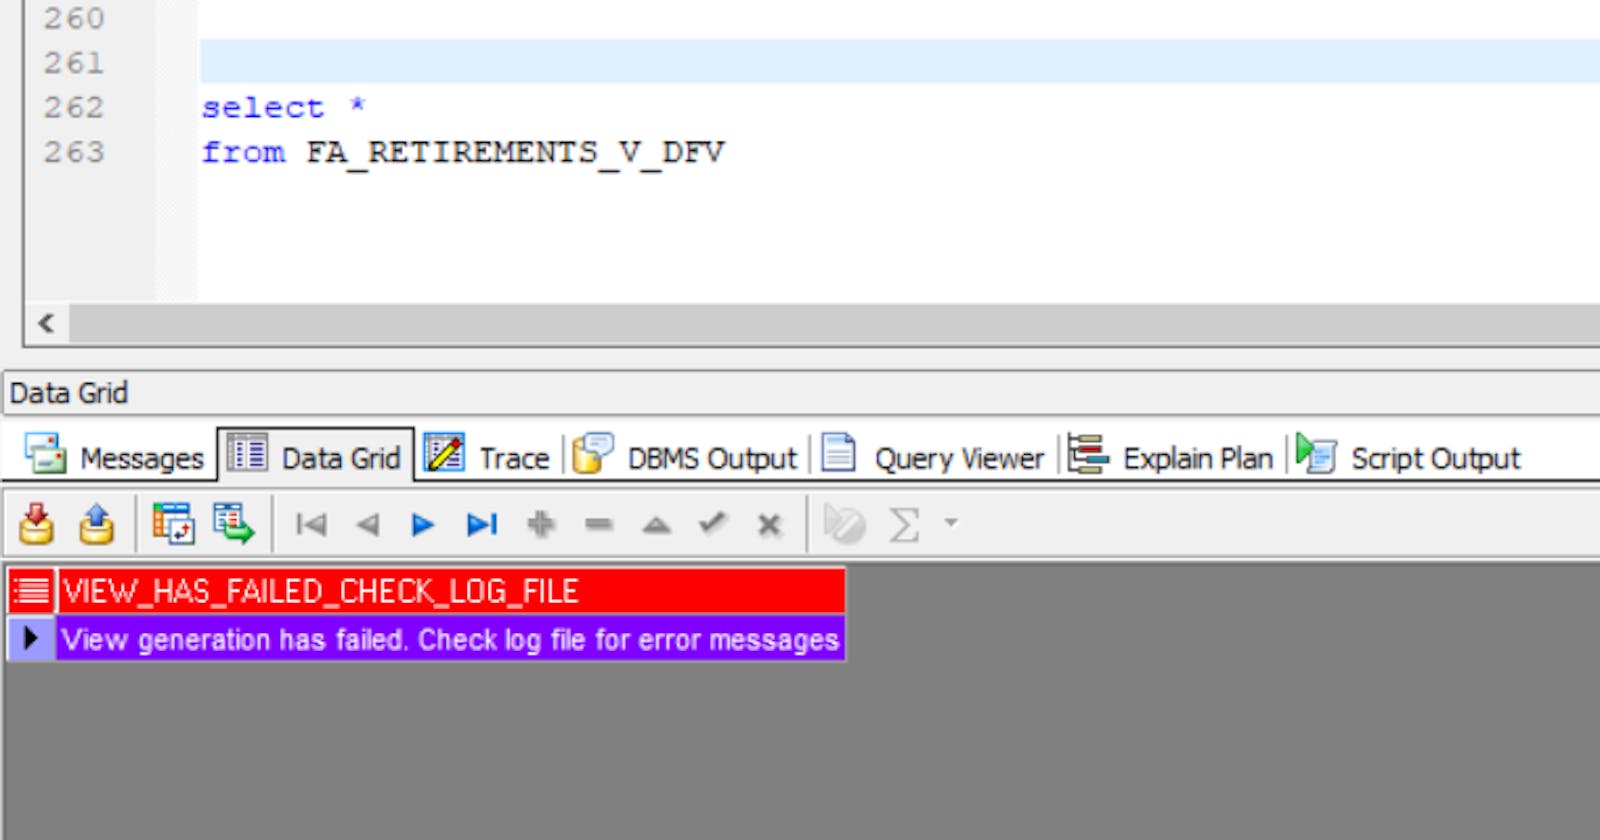 Why FA_RETIREMENTS_V_DFV view is not created?